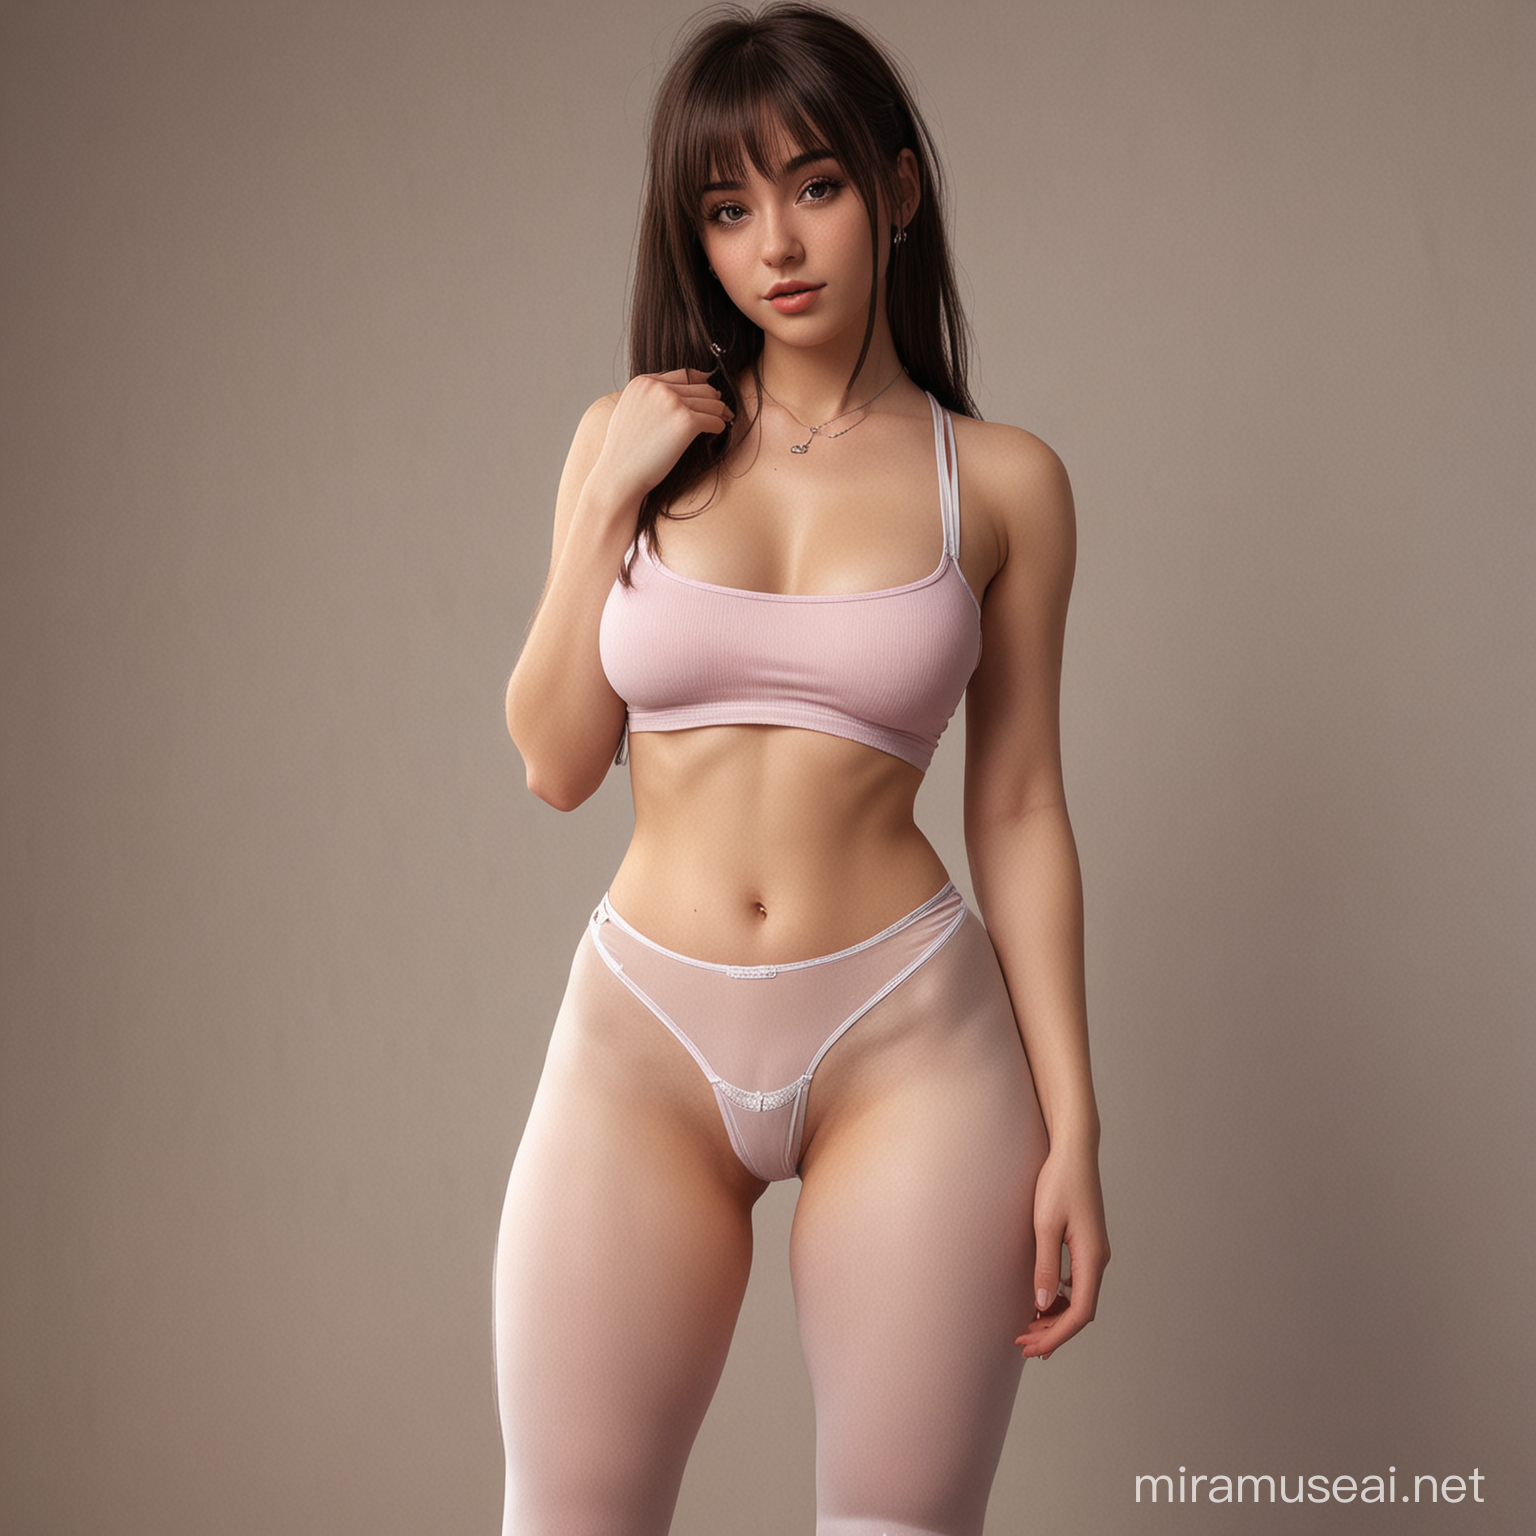 make a complete body pic, sexy and charming model, no erorrors, no duplicate. e-girl, style, ghotic thot oufit, thong, hot, stable, no blur. full body, hd, stablediffusion, high resolution, the girl has a face whit a bangs hair cut, no deformations, 8k, gorgeous outfit, definited face, proportions, charming vibes, real hair, no low definition, no imperfections, realistic body and face, piercing, sultry, tart, lass, real skin texture, full body, gorgeous dettails, cute crop top, proportions, aesthetic outfit, e-girl style makup, definted acessory, no deformations, realistic proportions, no deformed acessory, no low quality acessory, realistic hair, full body, beautyful, realistic locations background, realistic girl, realistic fabric, cameltoe leggins, realistic,  poking nipples, dont hide dettails, realistic body, realistic proportions, definited body parts, 